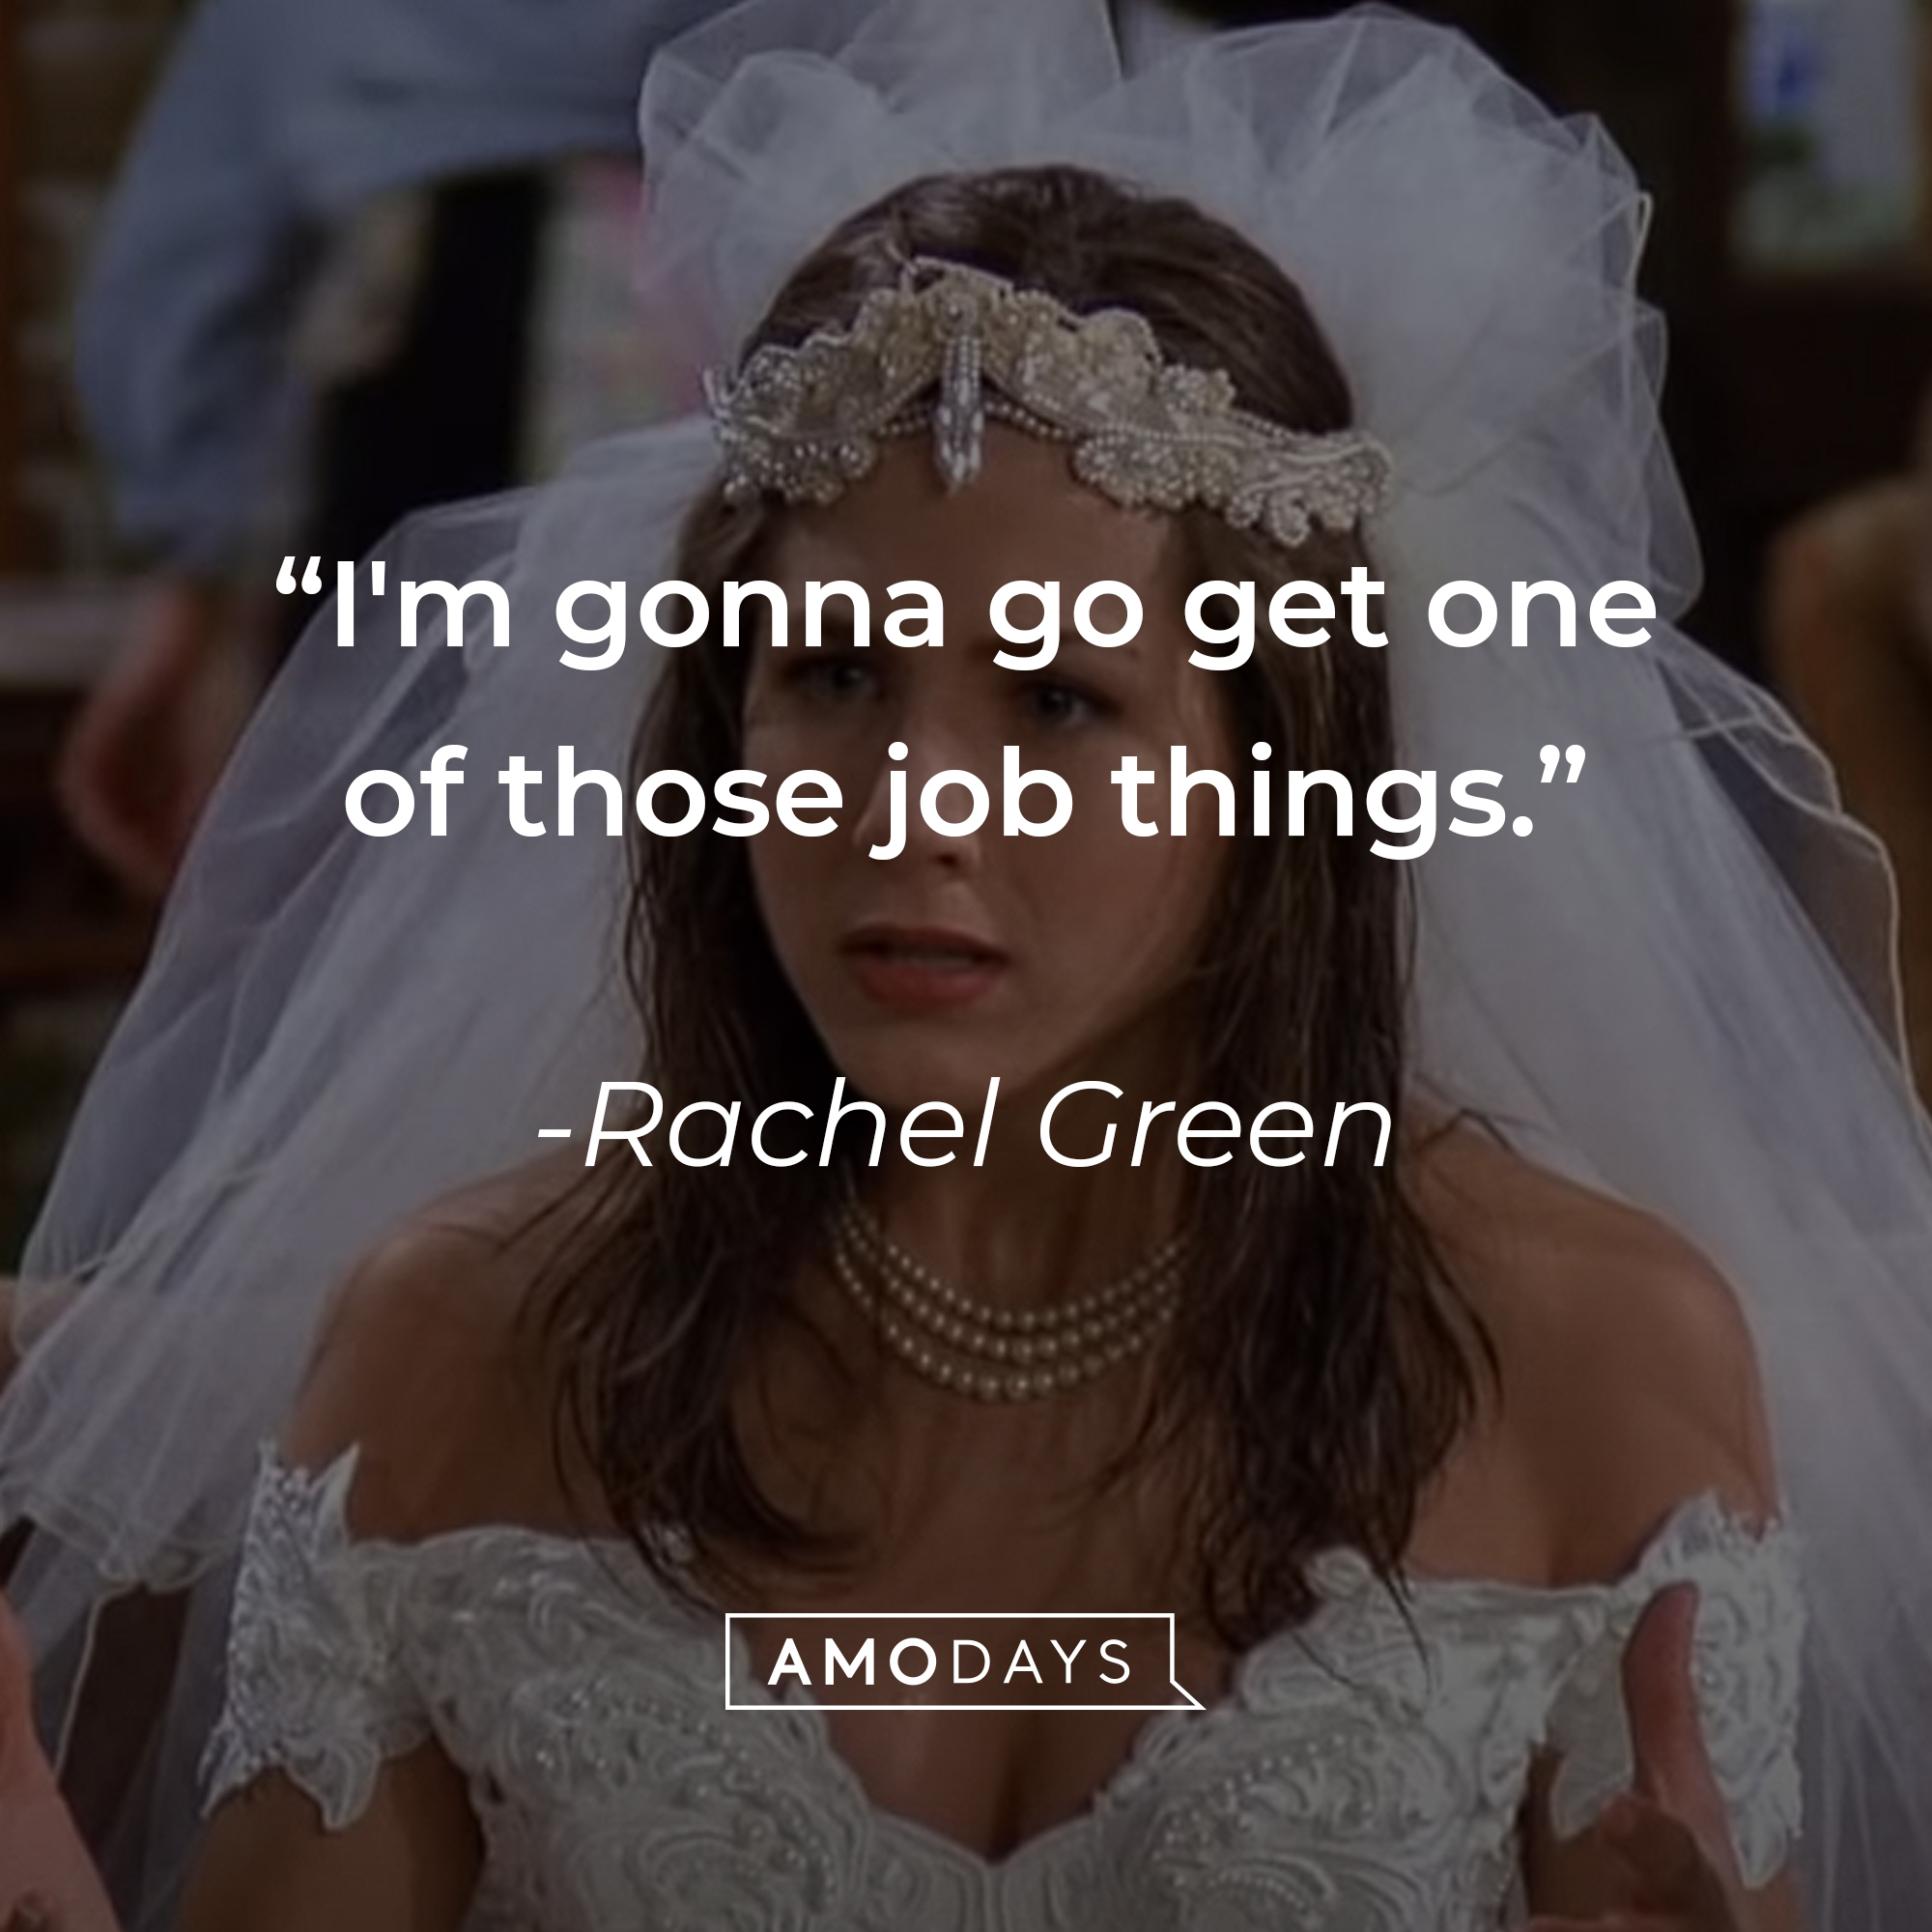 Rachel Green's quote: "I'm gonna go get one of those job things." | Source: youtube.com/warnerbrostv